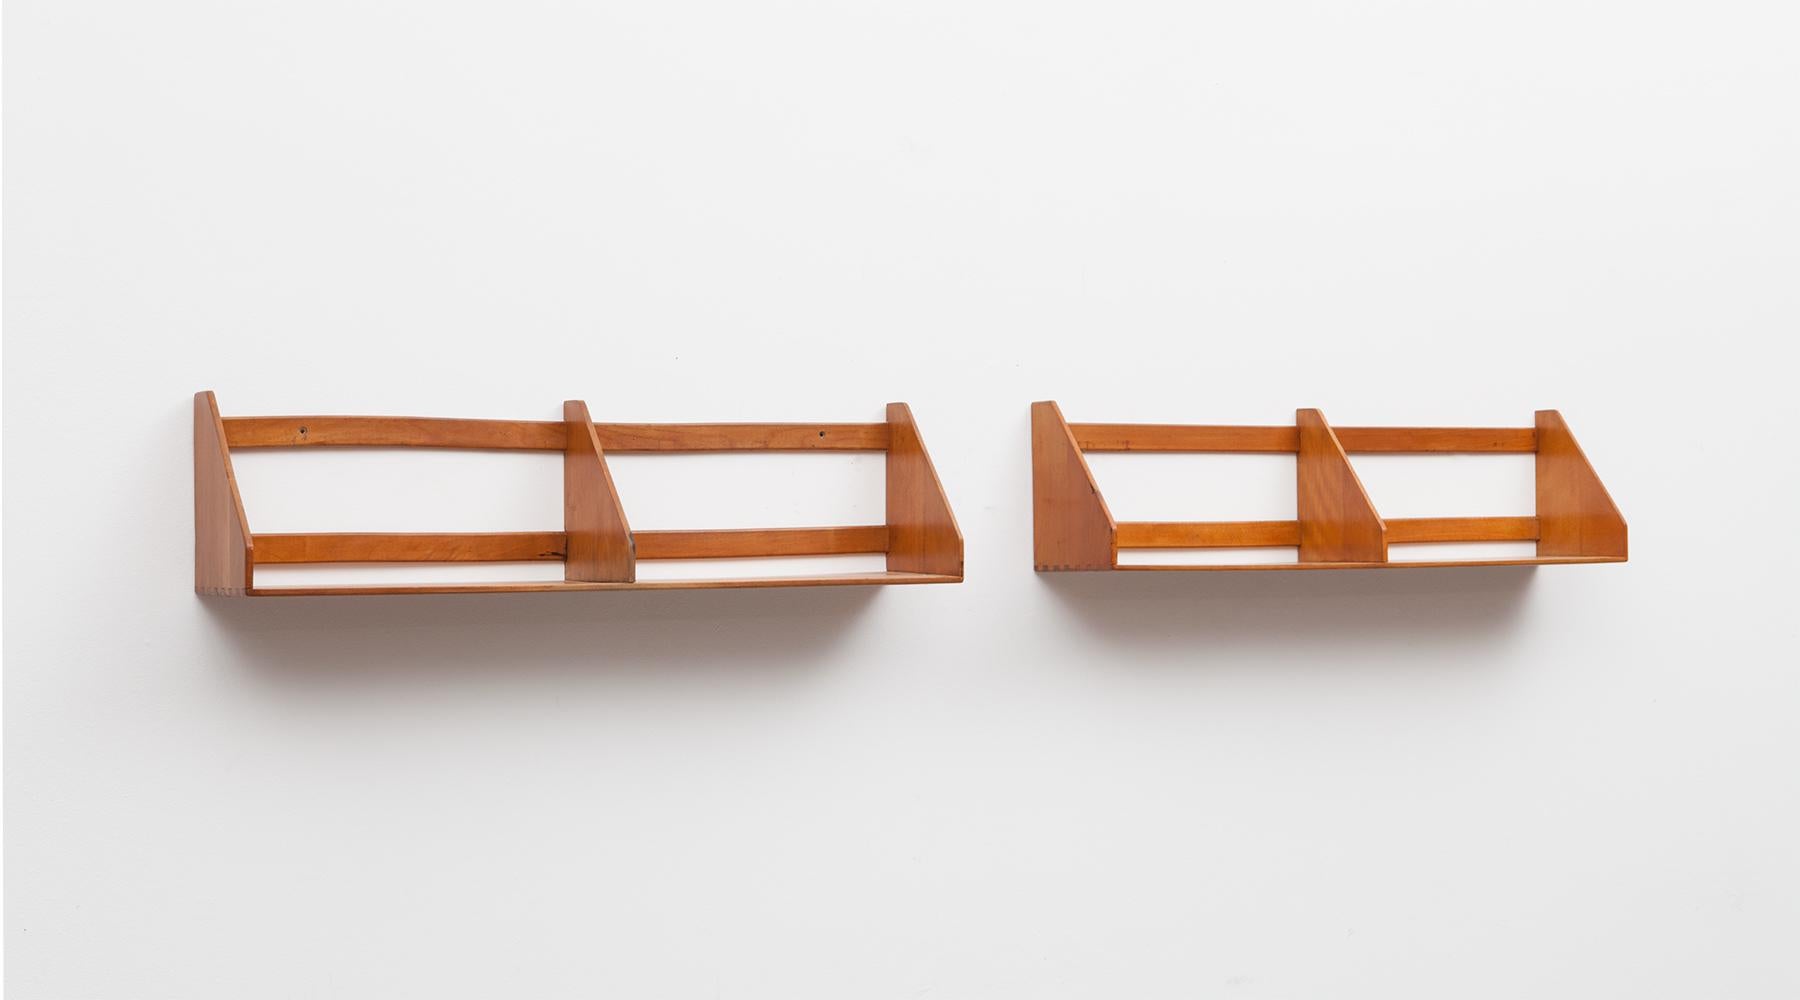 Two shelves by Hans Wegner manufactured by A.P. Stolen, Denmark, 1951

Wonderful set of two shelves designed by Hans Wegner. Theese ingenious pieces comes in perfect condition, simple but elegant design in teak. Manufactured by A.P. Stolen in